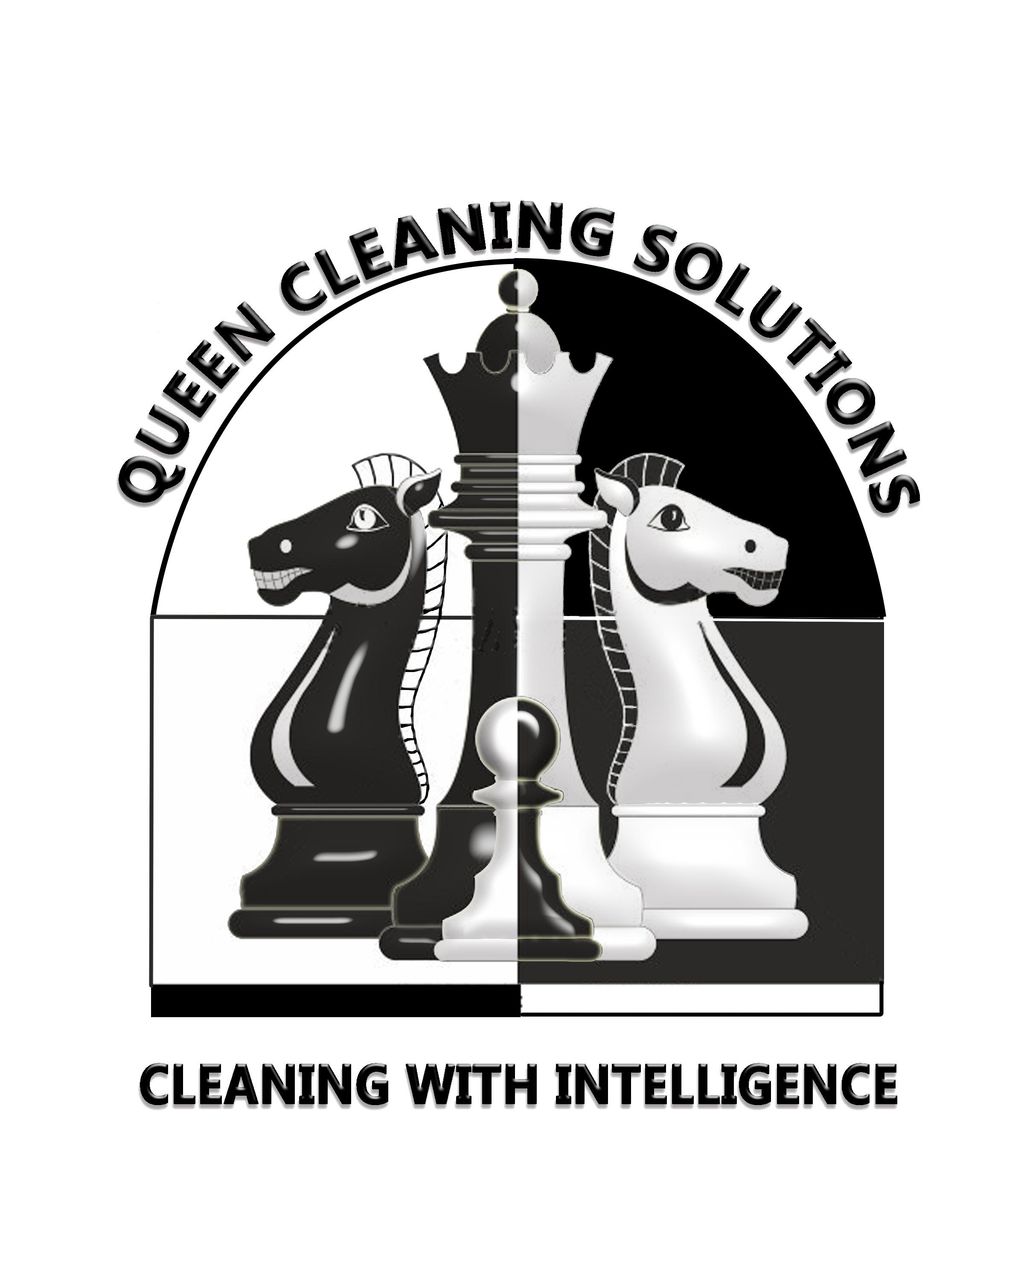 Queen Cleaning Solutions